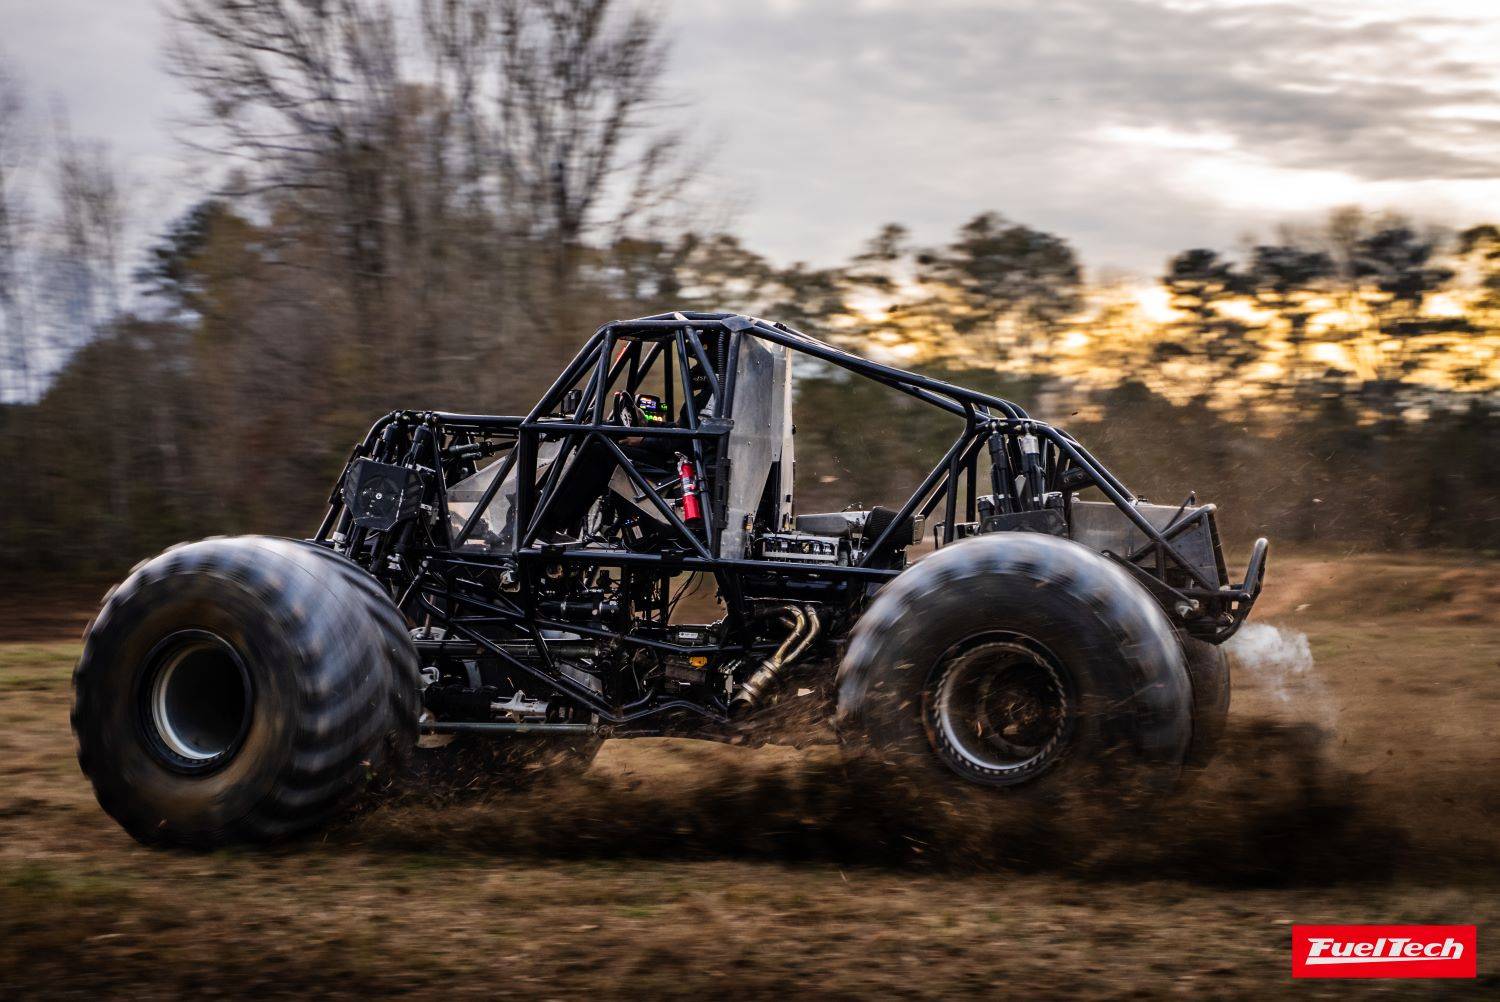 Monster truck throwing some dirt while testing FuelTech EFI.